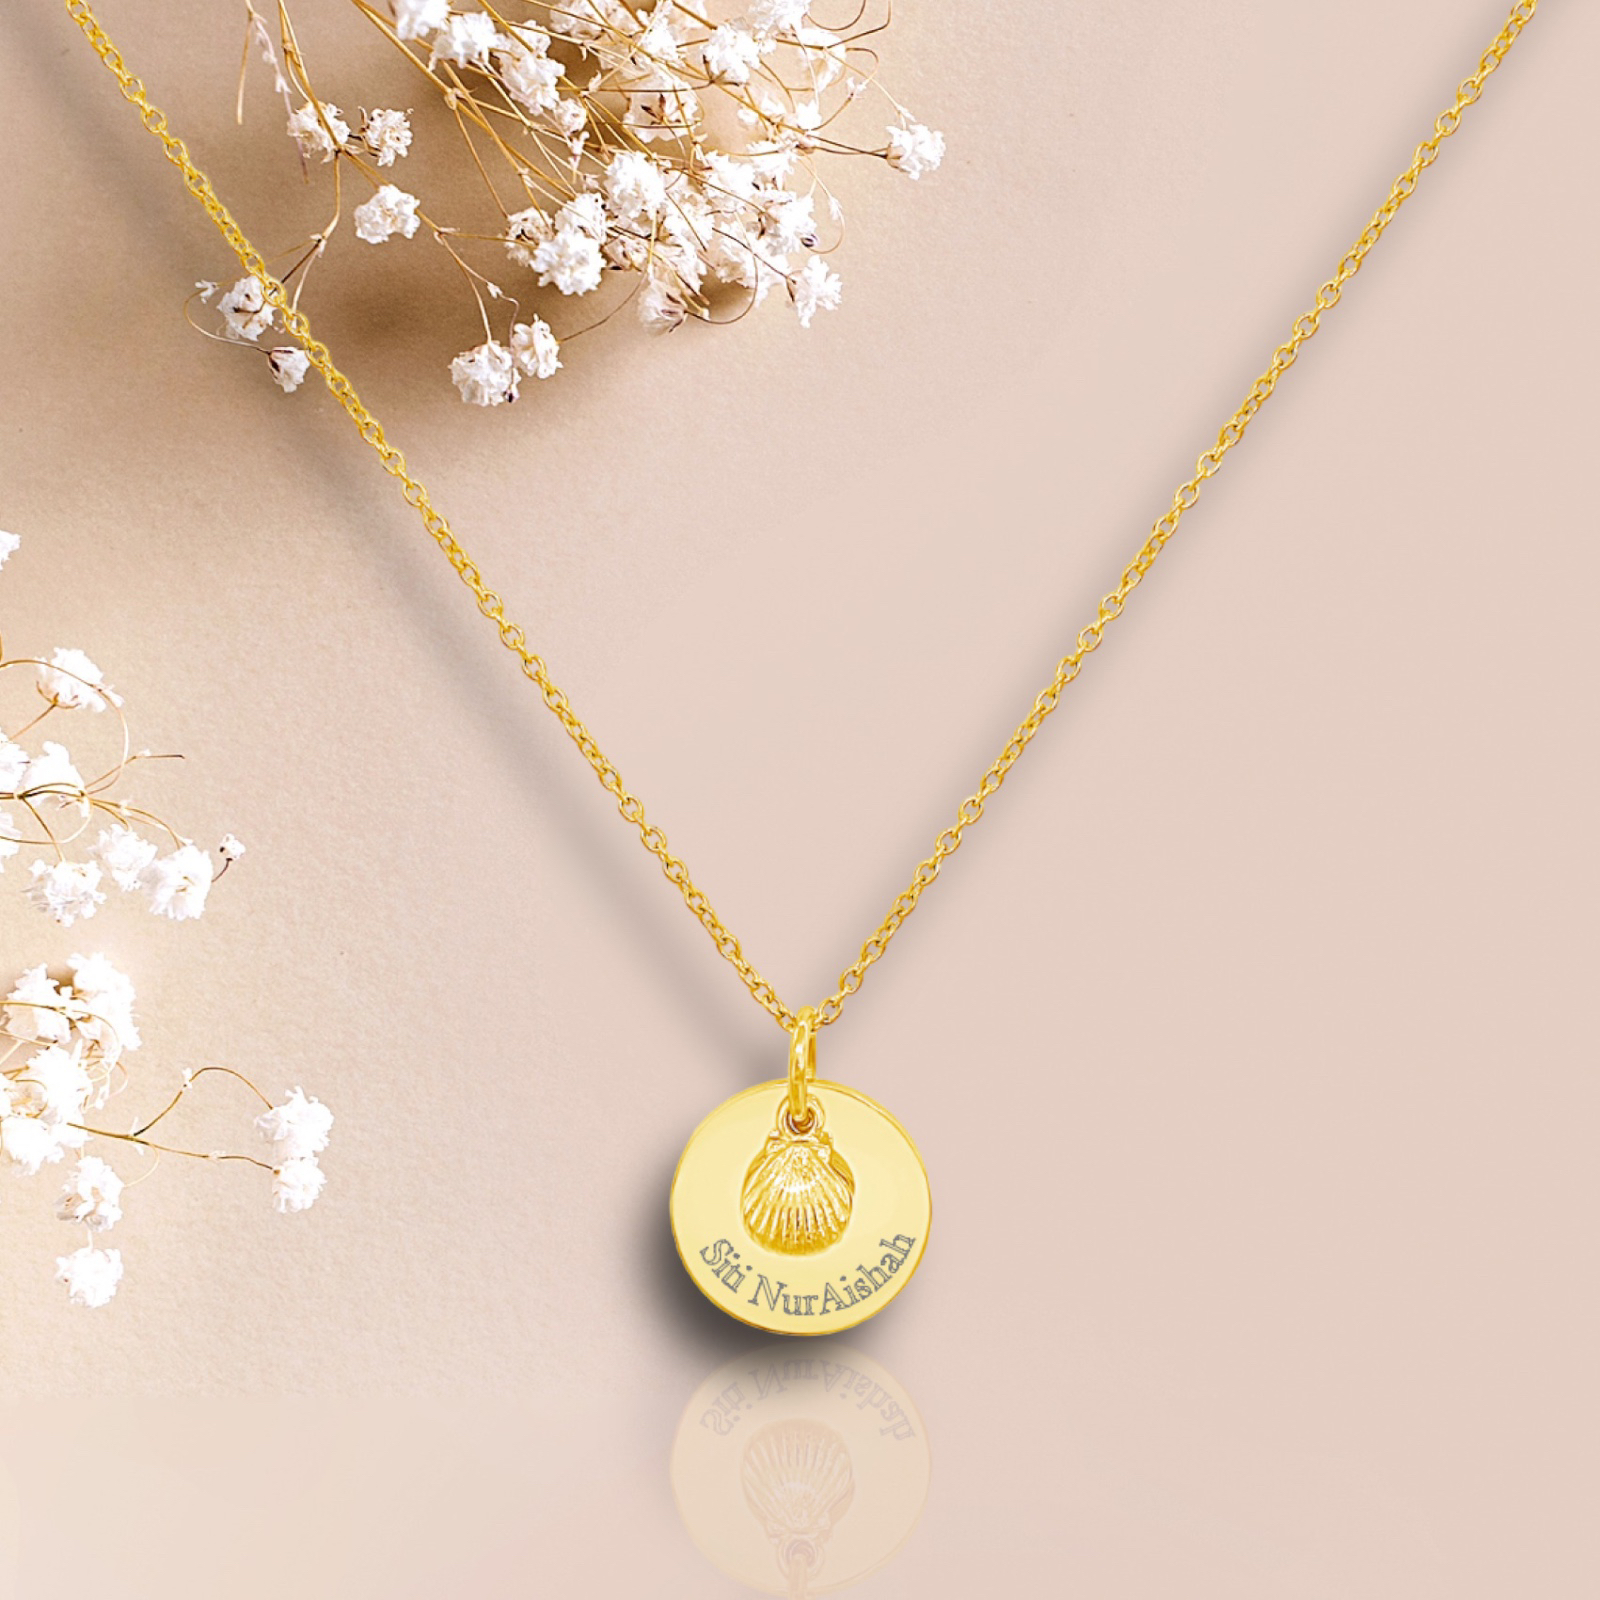 Seashell Charm Necklace - Gold